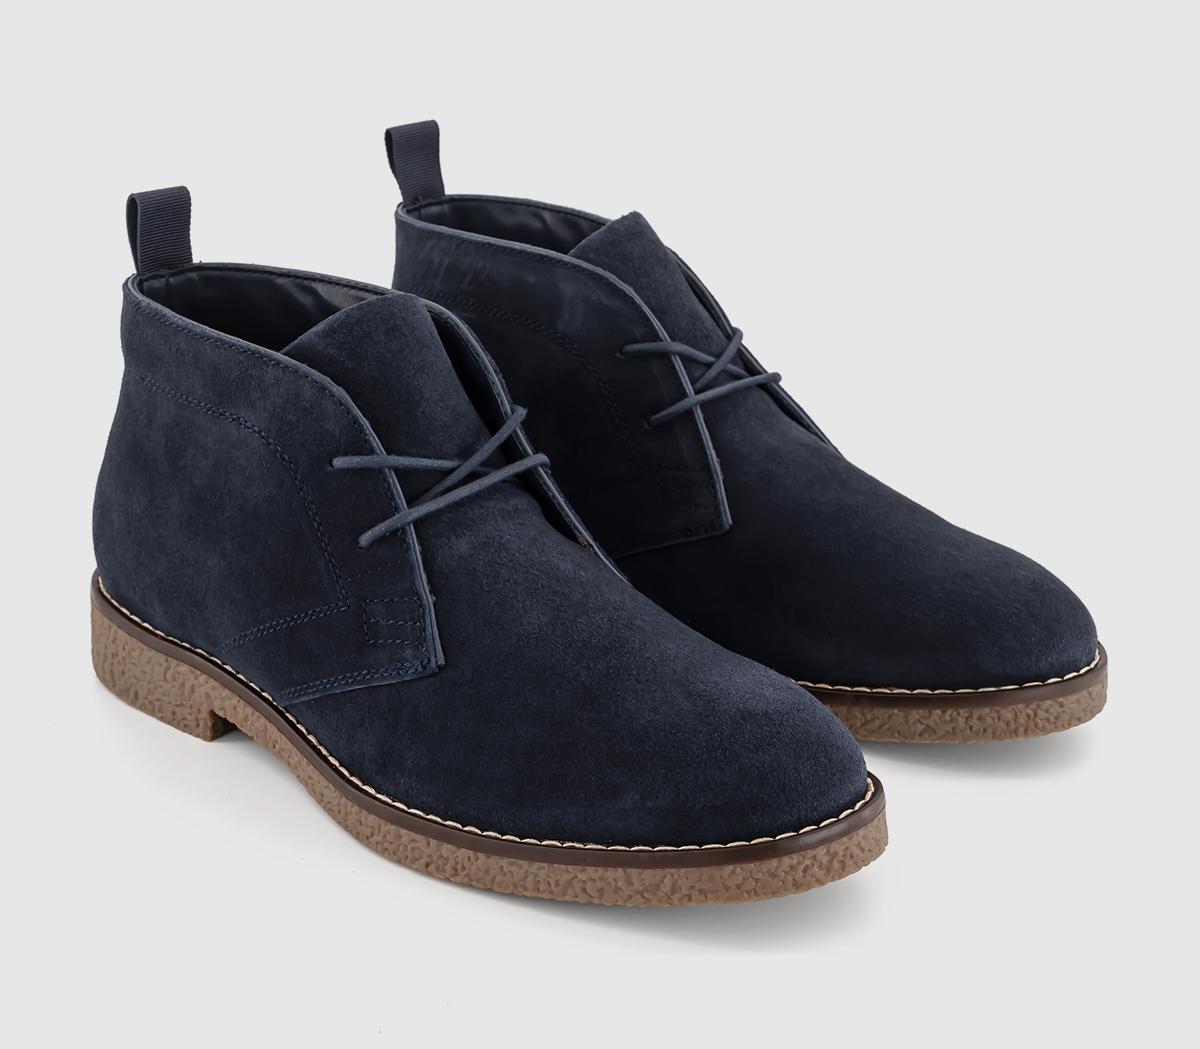 OFFICE Mens Byron Suede Desert Boots Navy Blue, 11